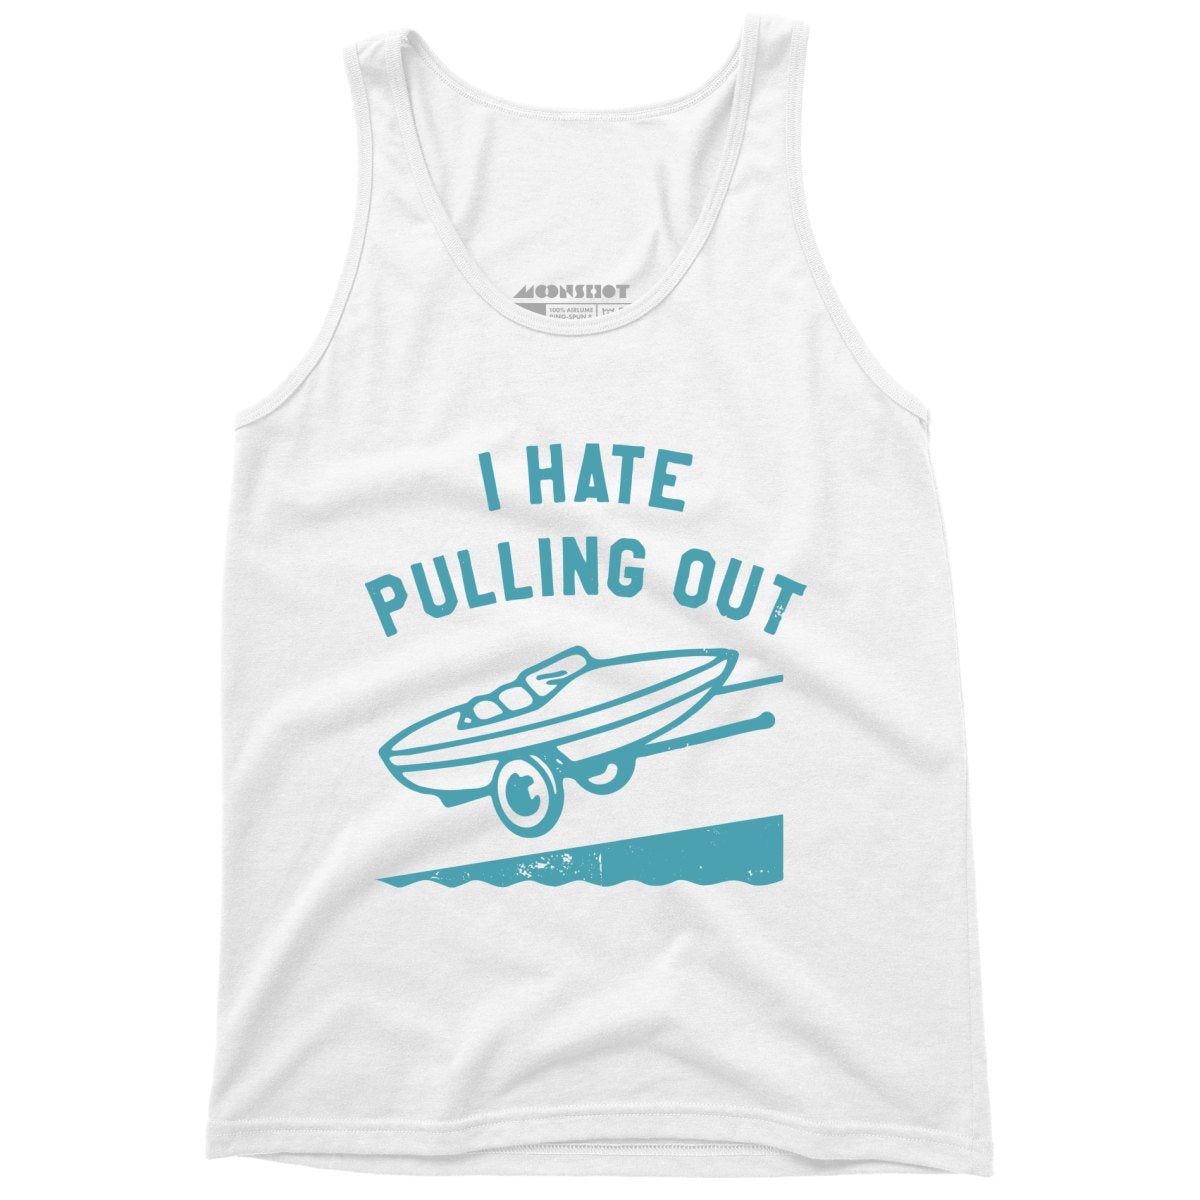 I Hate Pulling Out - Unisex Tank Top